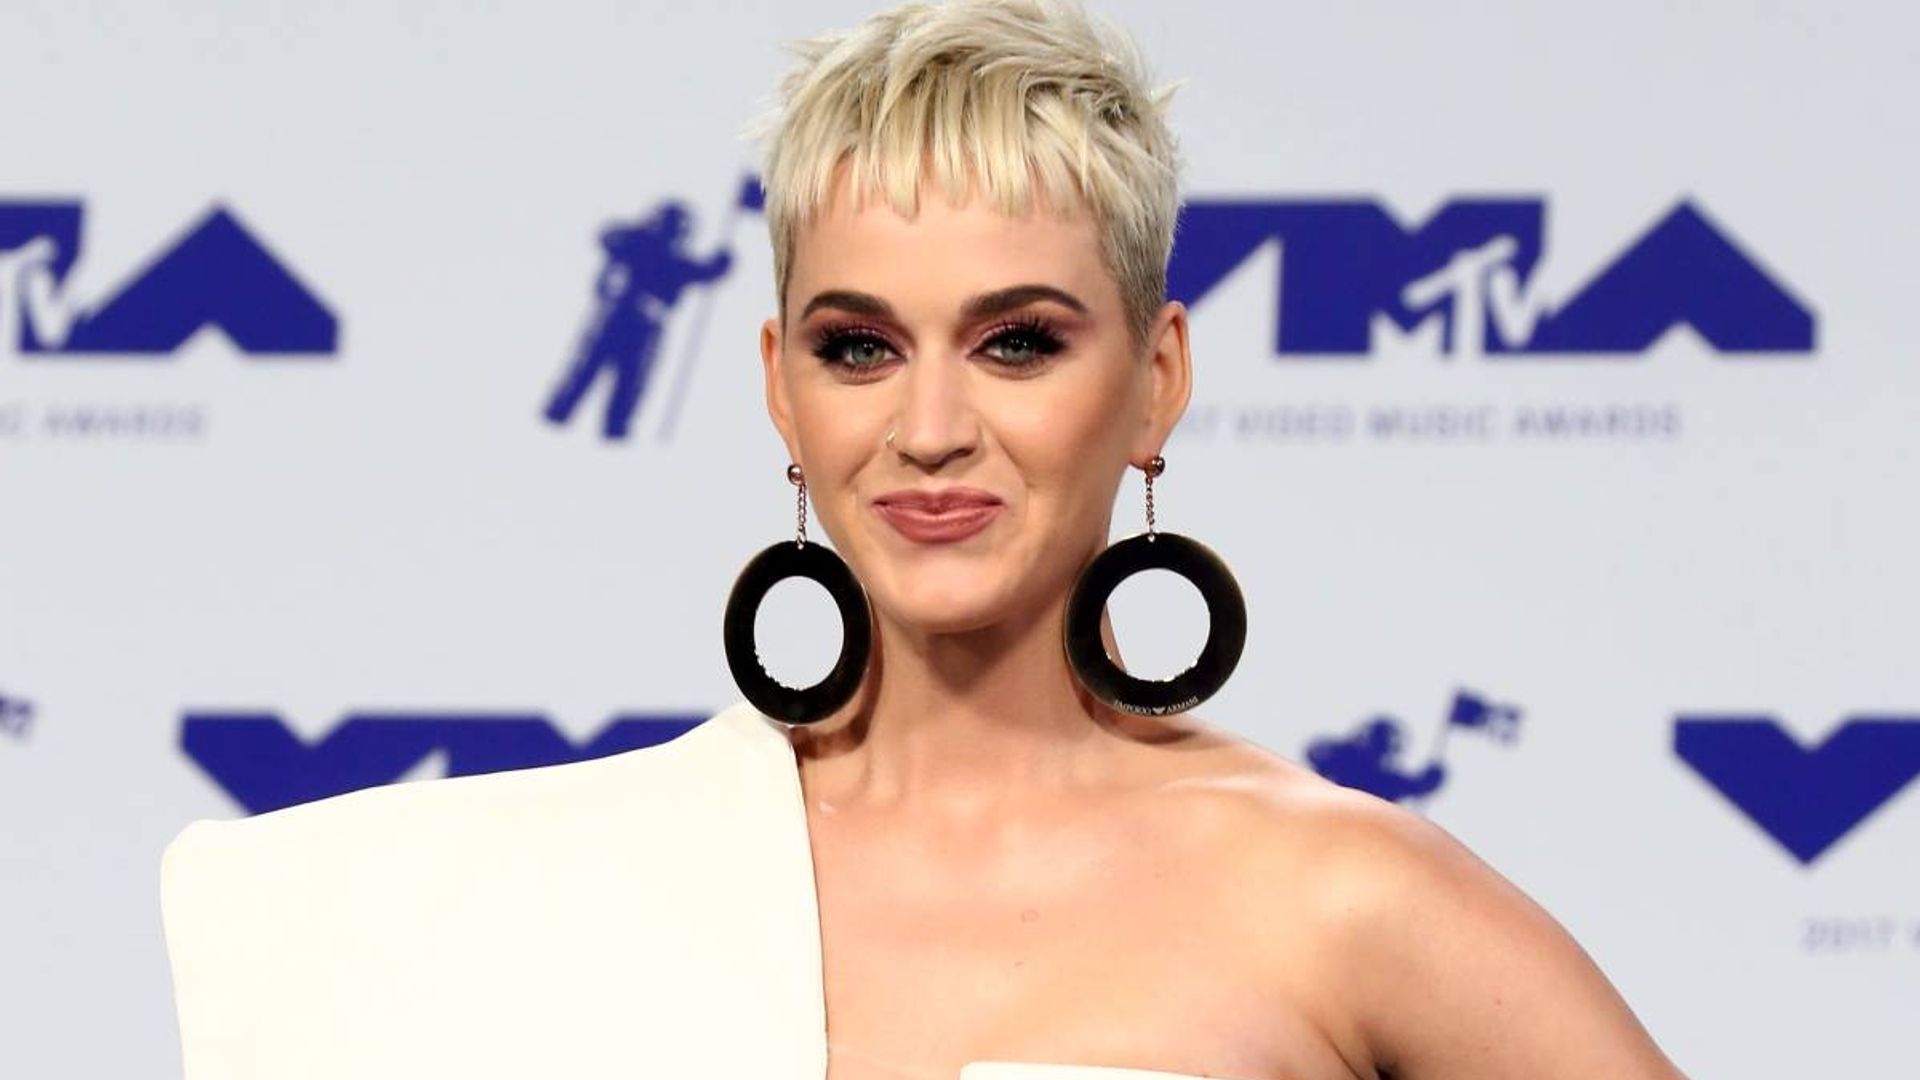 Katy Perry makes major change to her appearance - and Orlando Bloom ...